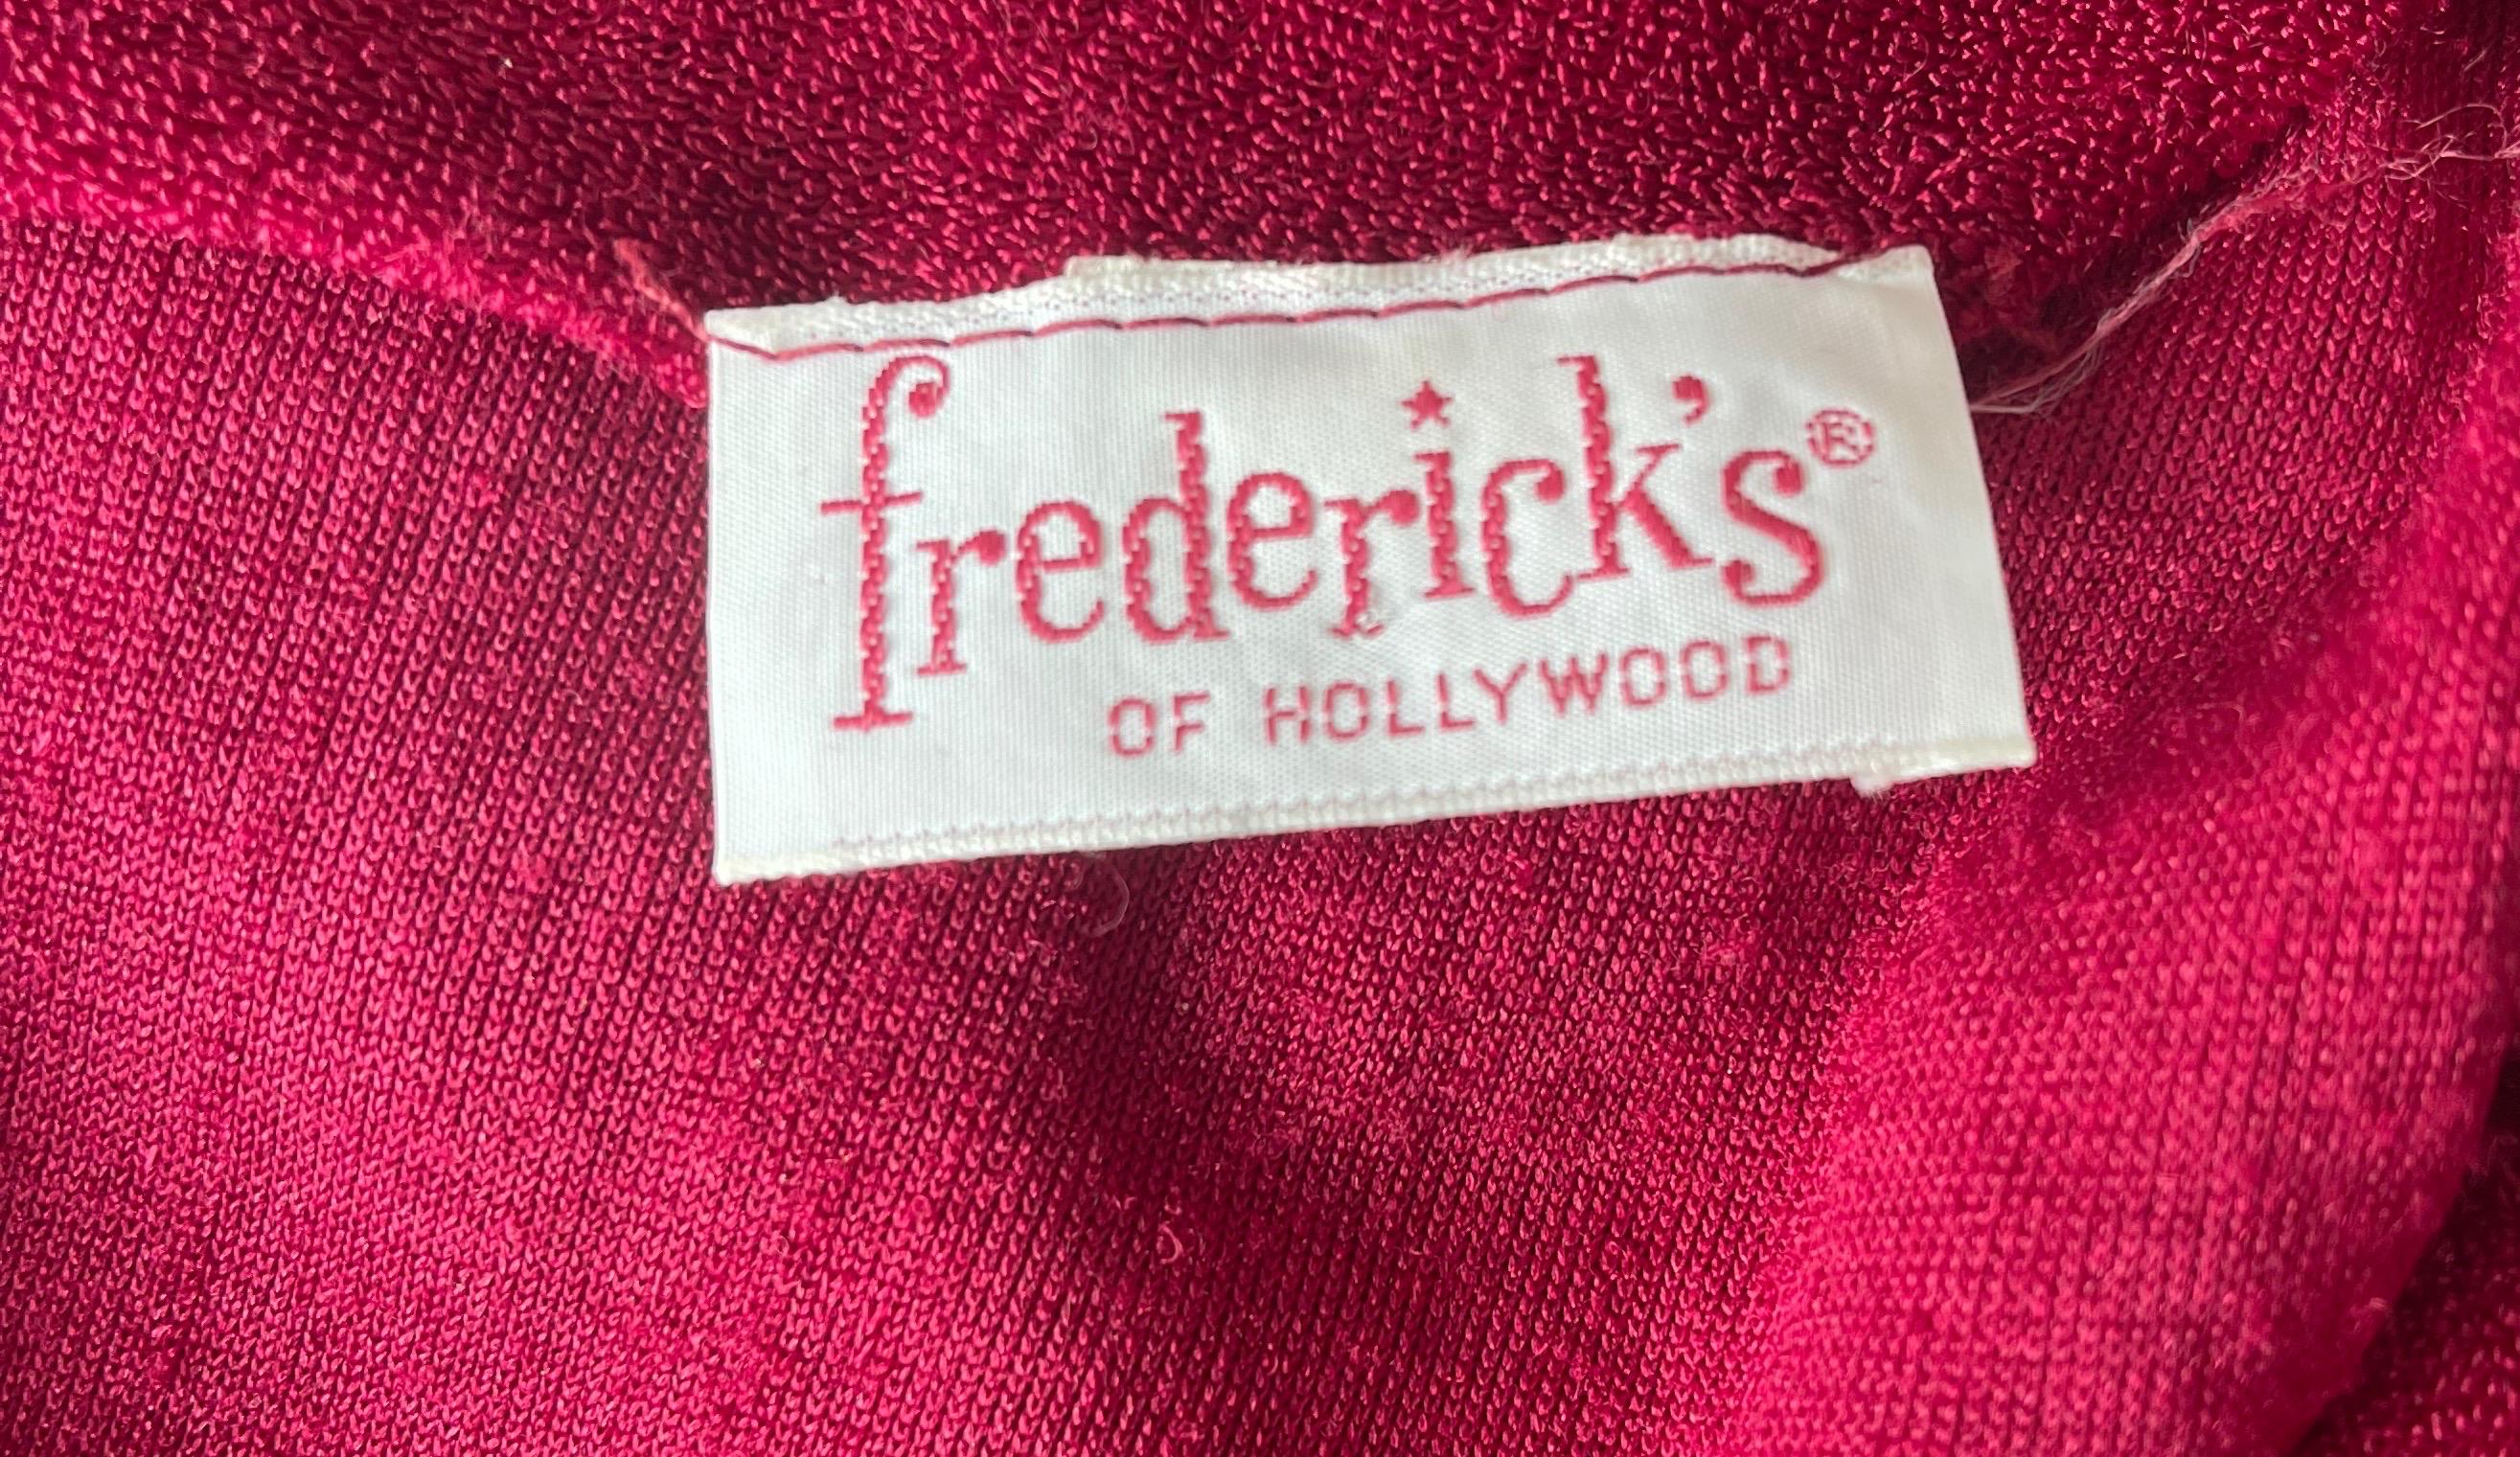 Amazing 1970s FREDERICK’S OF HOLLYWOOD burgundy / maroon velour terry cloth belted jumpsuit ! Features the softest velour fabric that stretches to fit. Tailored ruched bodice with bishop sleeves. Detachable sash belt. Slim legs with flared legs.